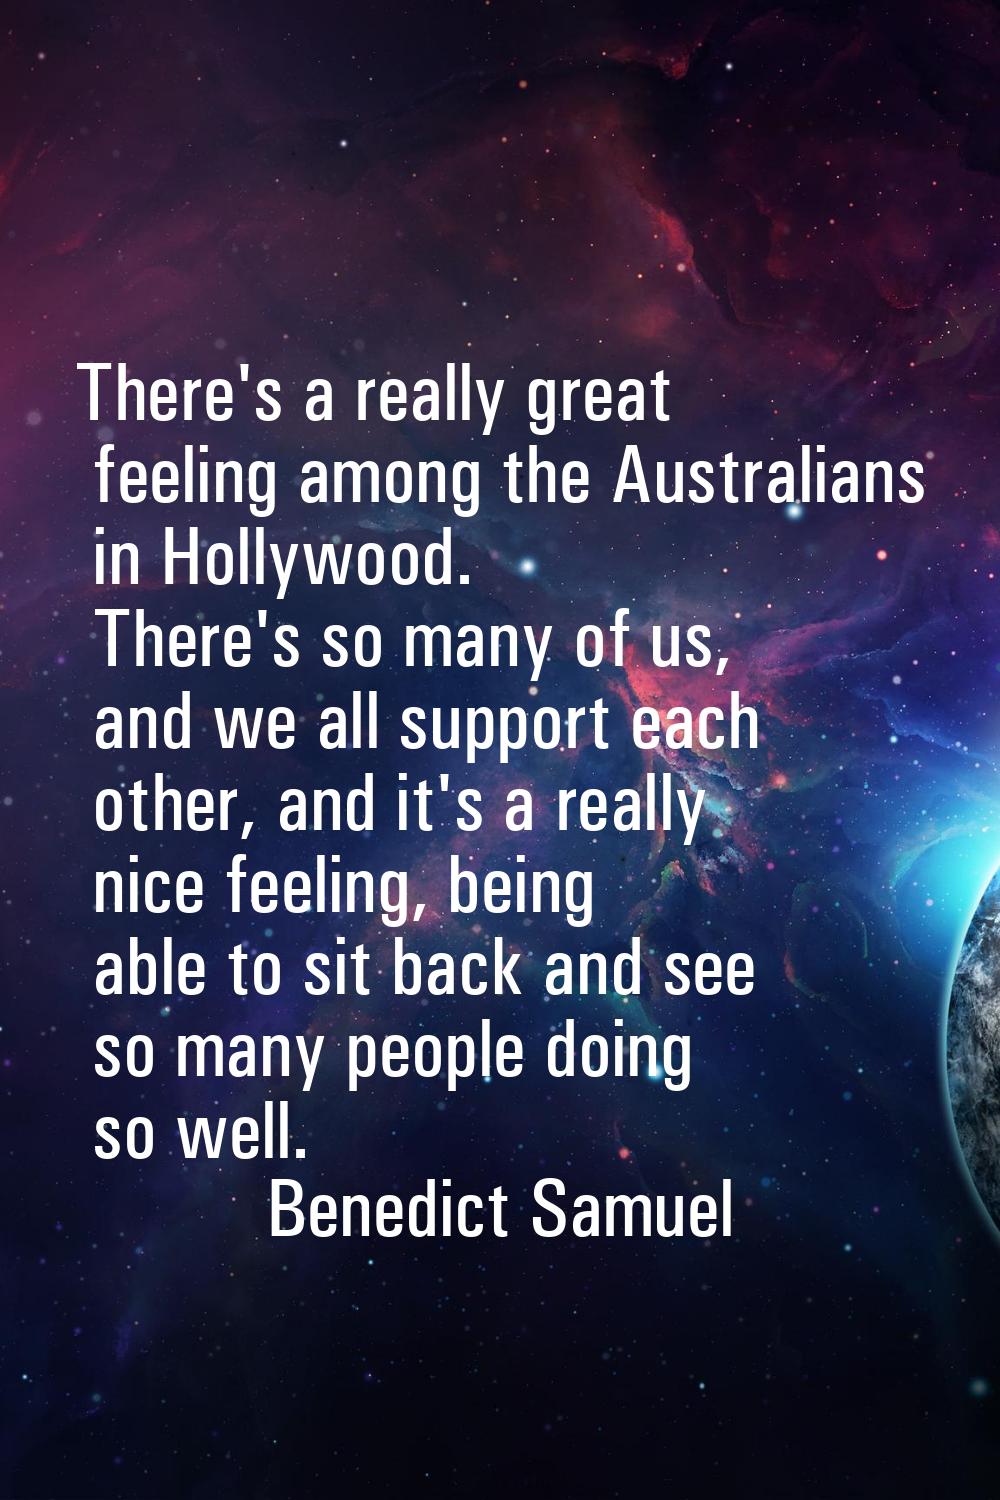 There's a really great feeling among the Australians in Hollywood. There's so many of us, and we al